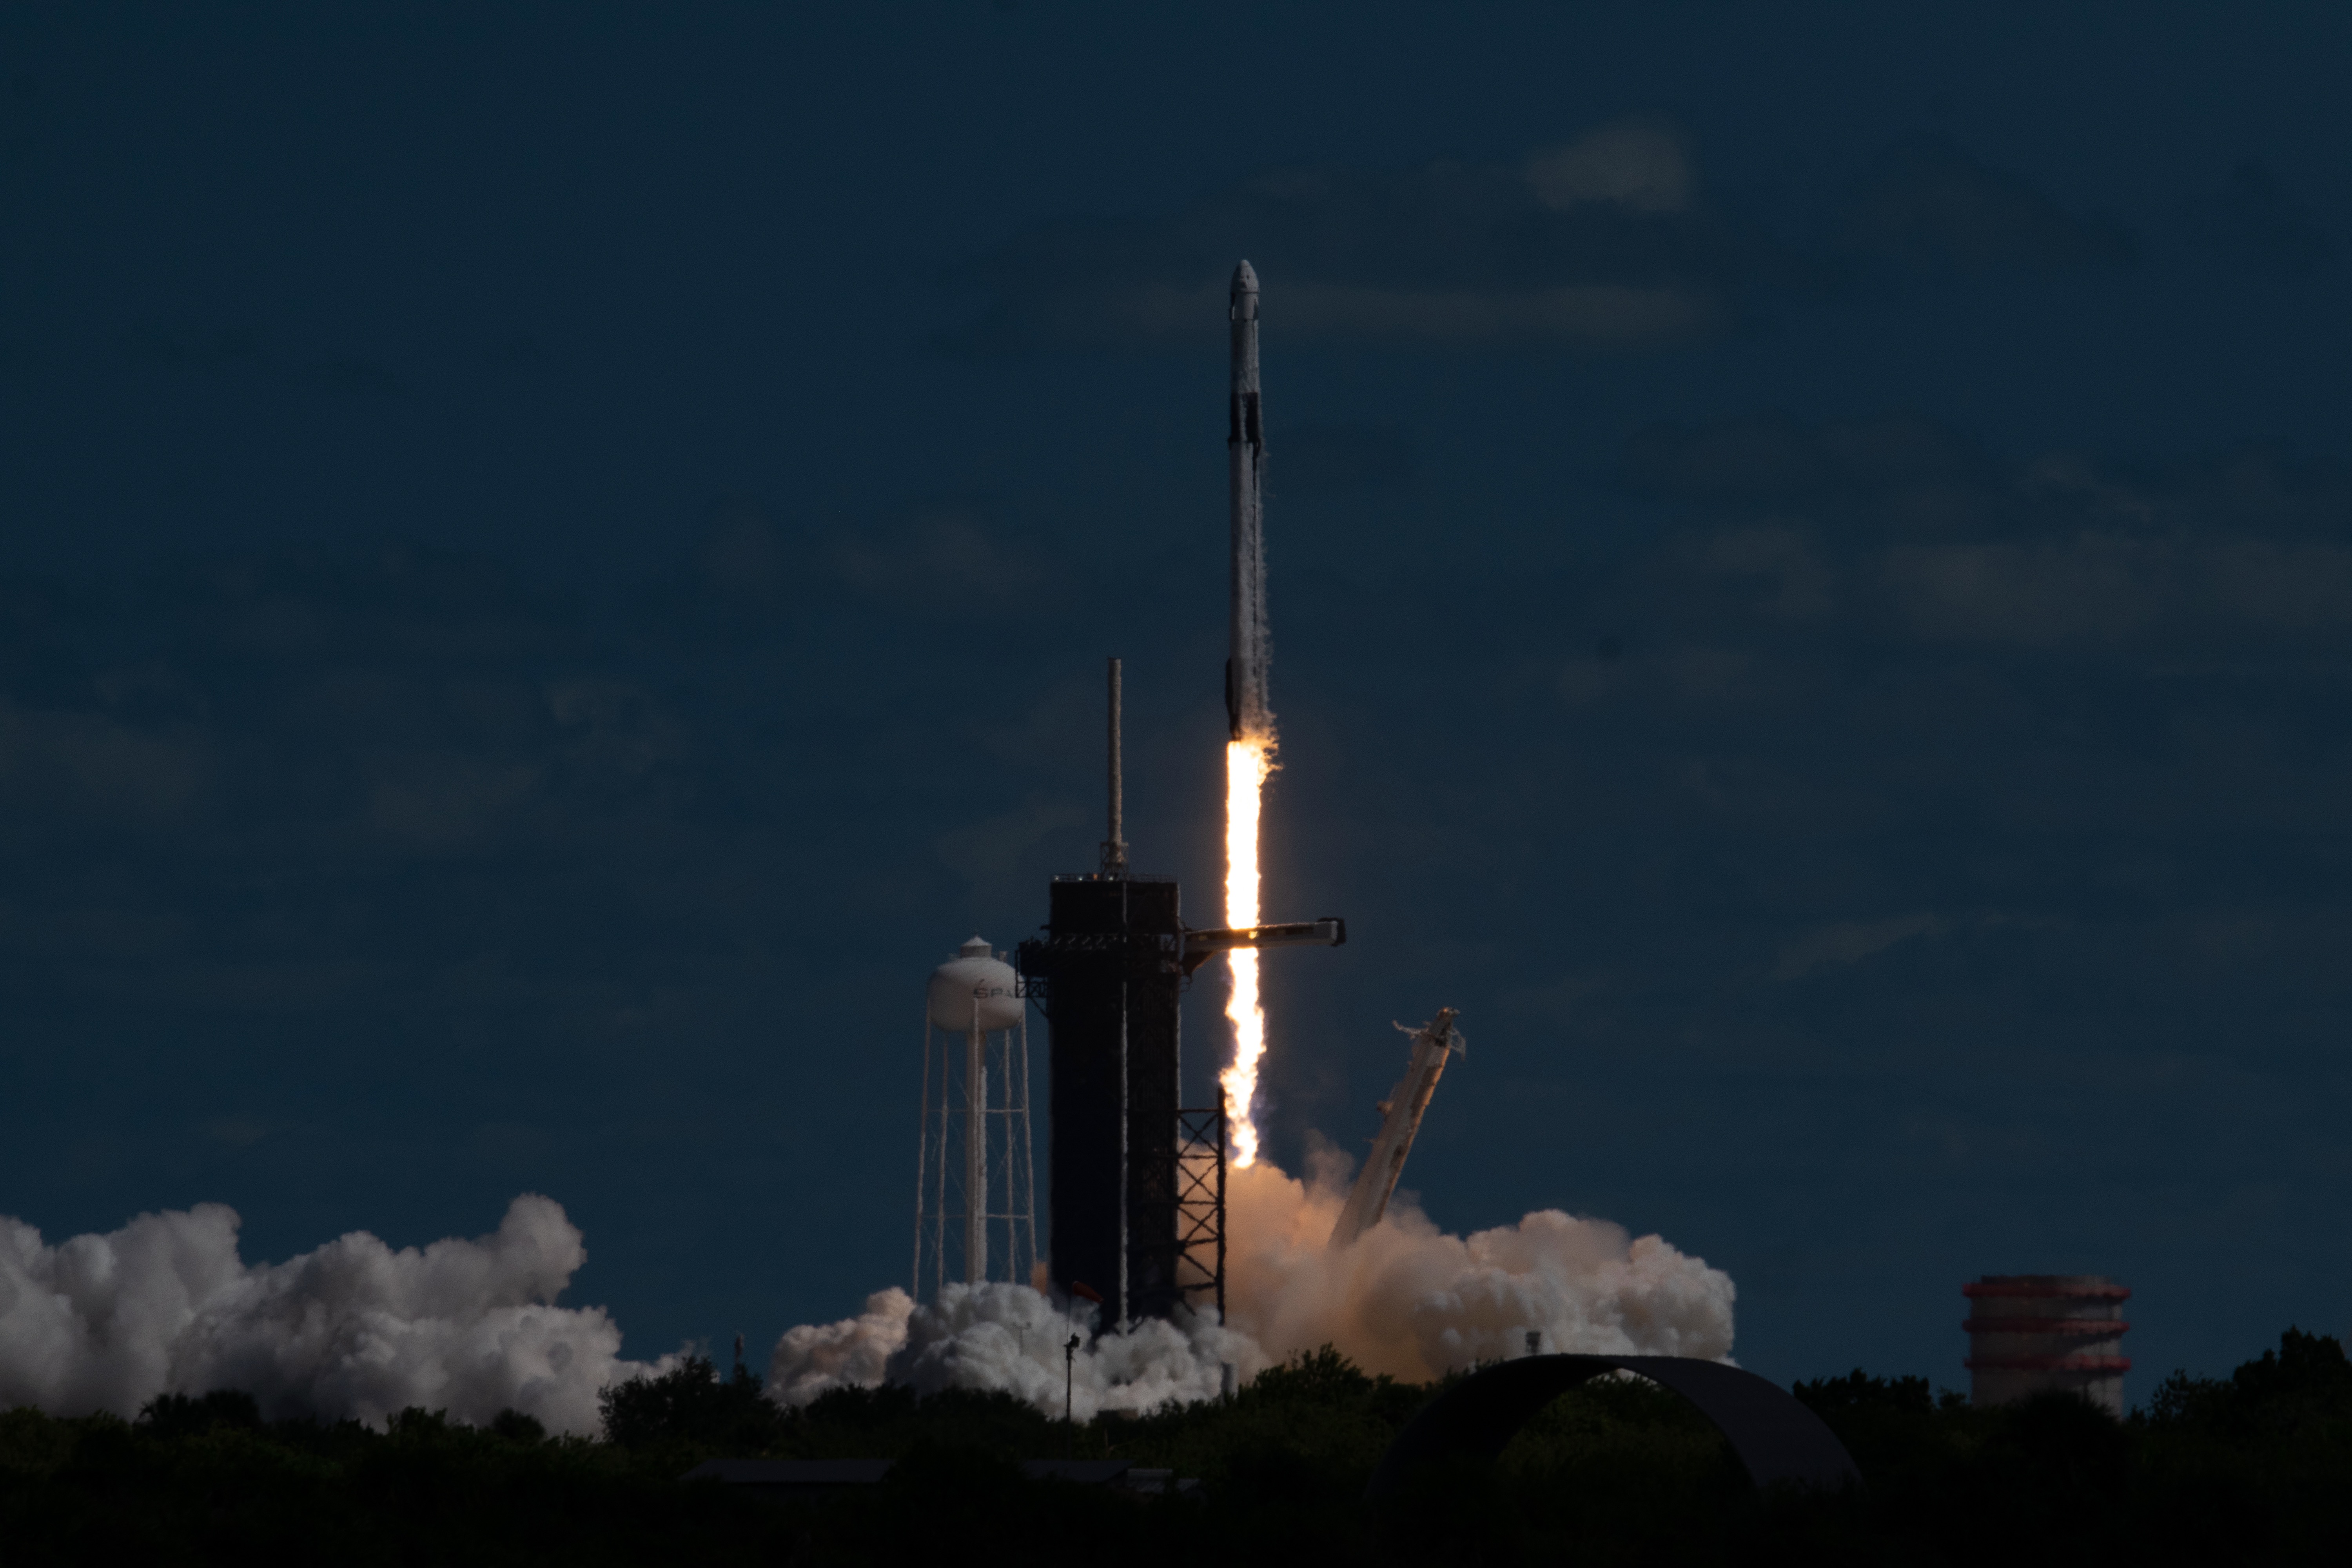 SpaceX's Crew-5 launch on Oct. 5, 2022, before any photo edits were applied.